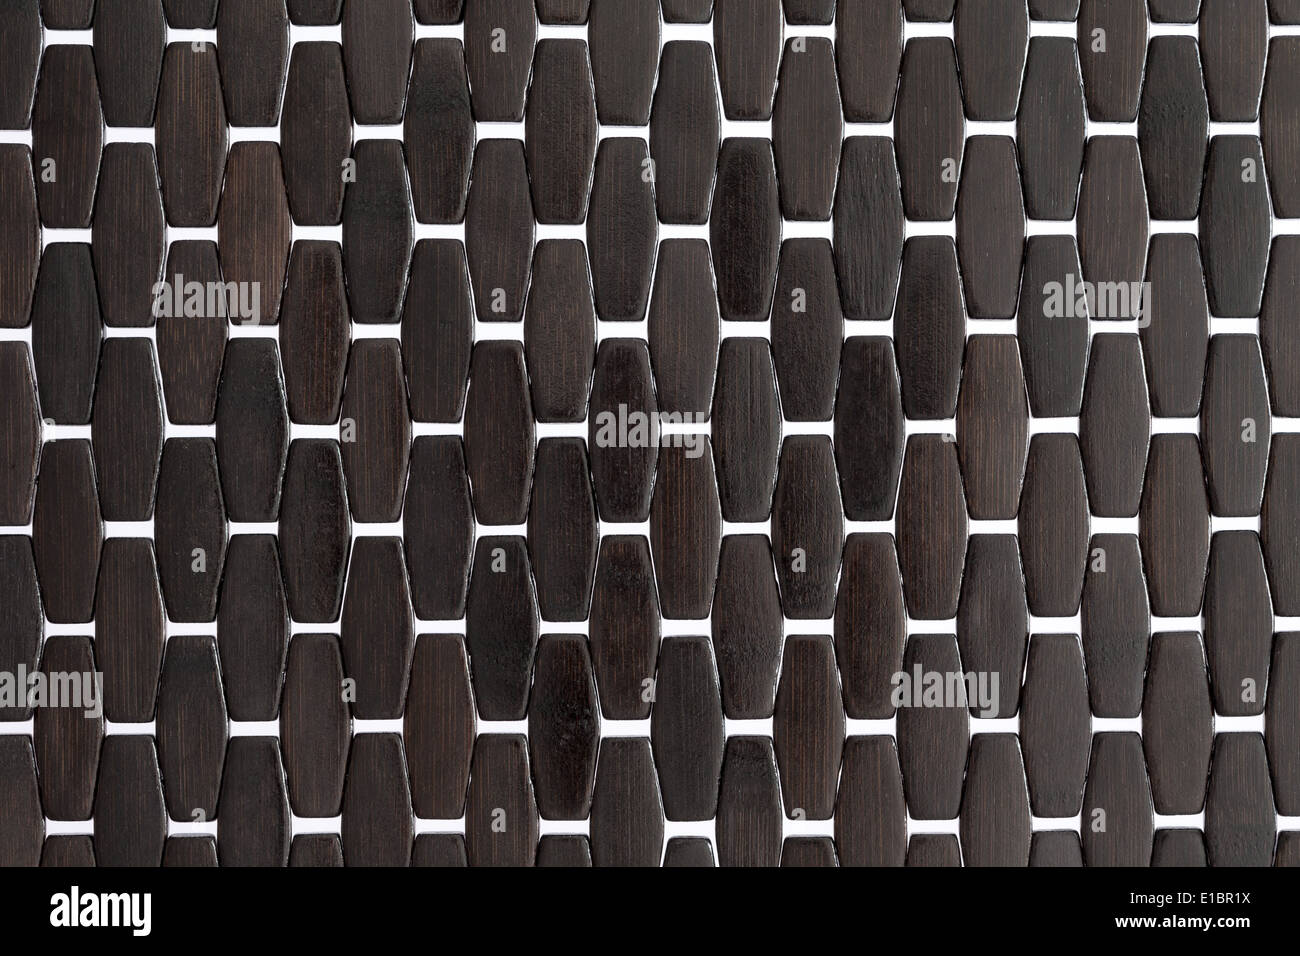 Background texture and pattern of a dark wood or bamboo mat with white cross weave detail and a repeat parallel pattern close up Stock Photo